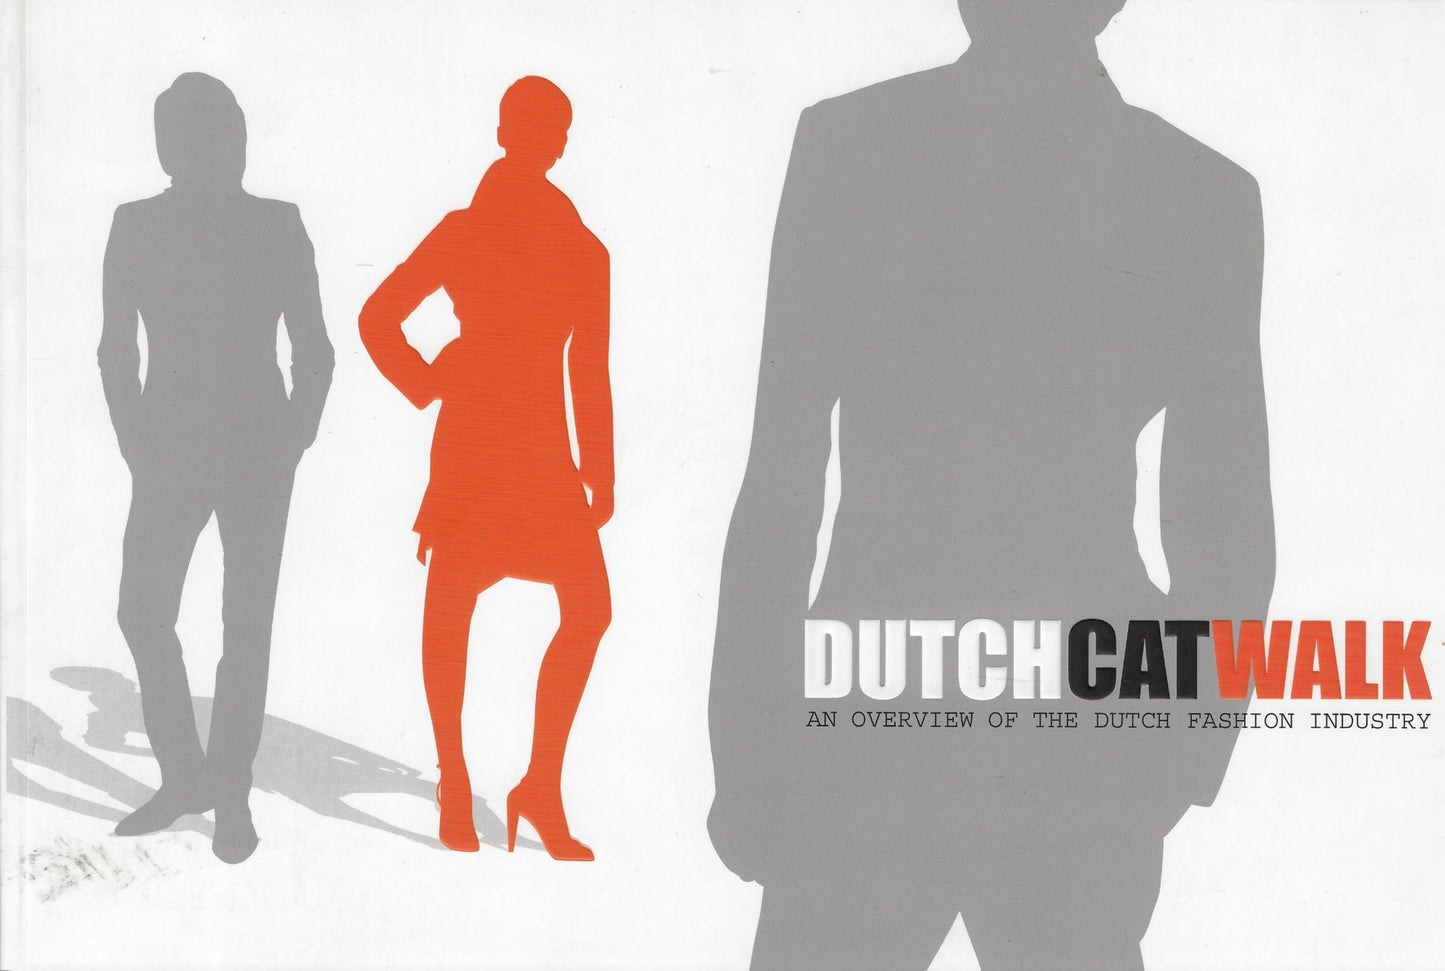 Dutch Catwalk / an overview of the Dutch fashion industry